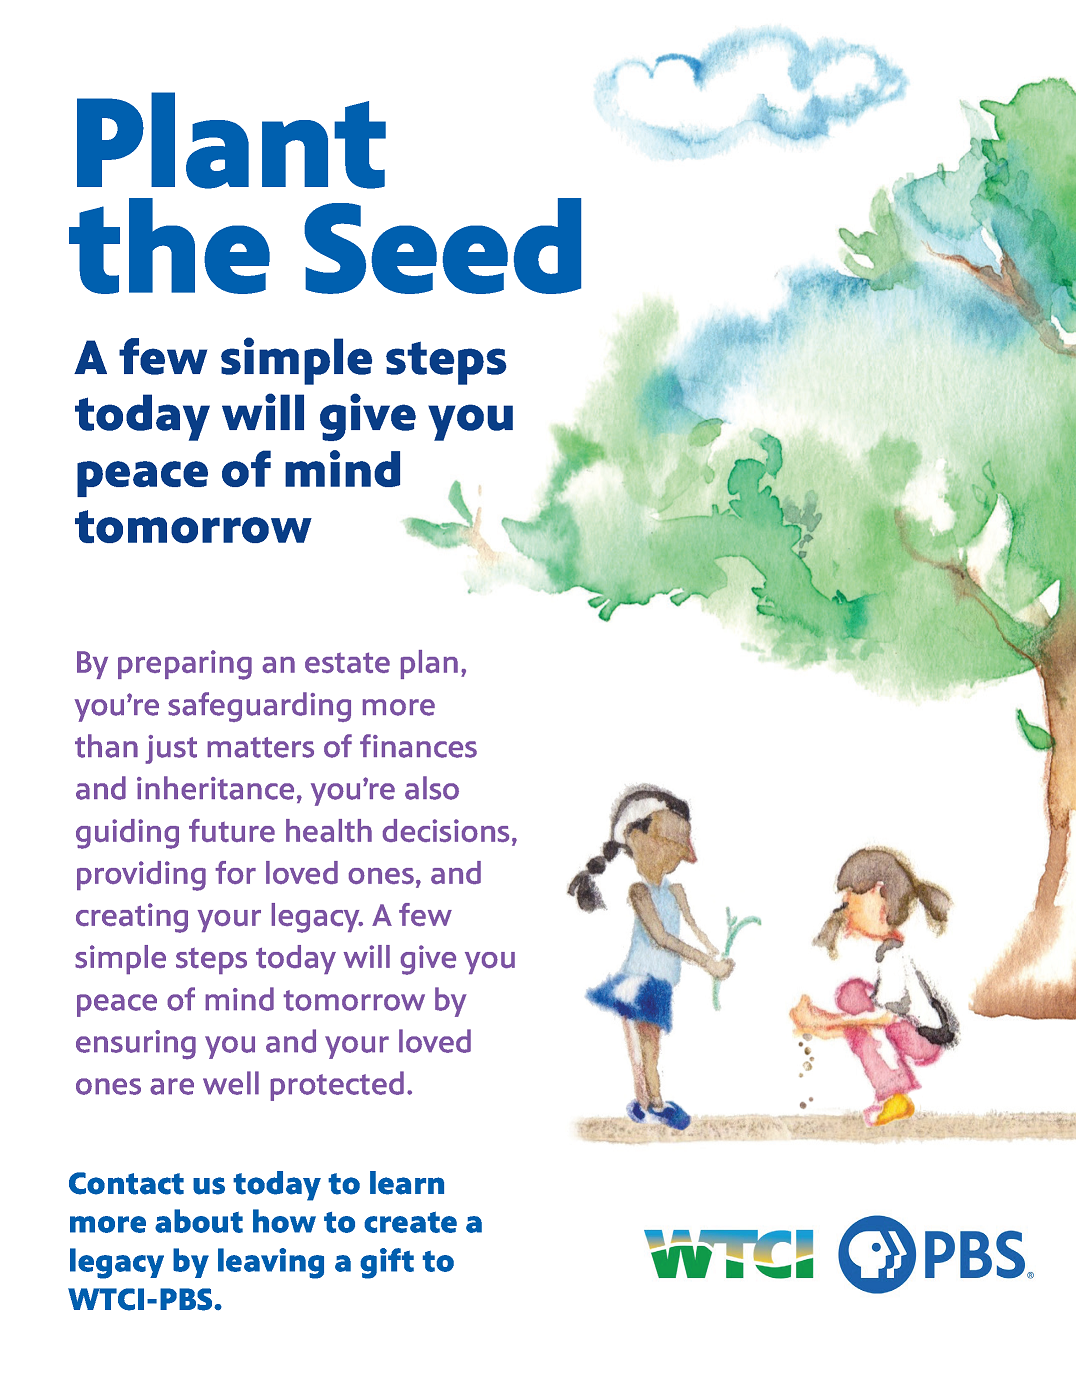 Two girls are planting seeds. Text reads: Plant the seed. A few simple steps today will give you peace of mind tomorrow. By Preparing an estate plan, you're safeguarding more than just matters of finances and inheritance, you're also guiding future health decisions, providing for loved ones, and creating your legacy. A few simple simple steps today with give you peace of mind tomorrow by ensuring you and your loved ones are well protected. Contact us today to learn more about how to create a legacy by leaving a gift to WTCI-PBS. Also, WTCI PBS logo.